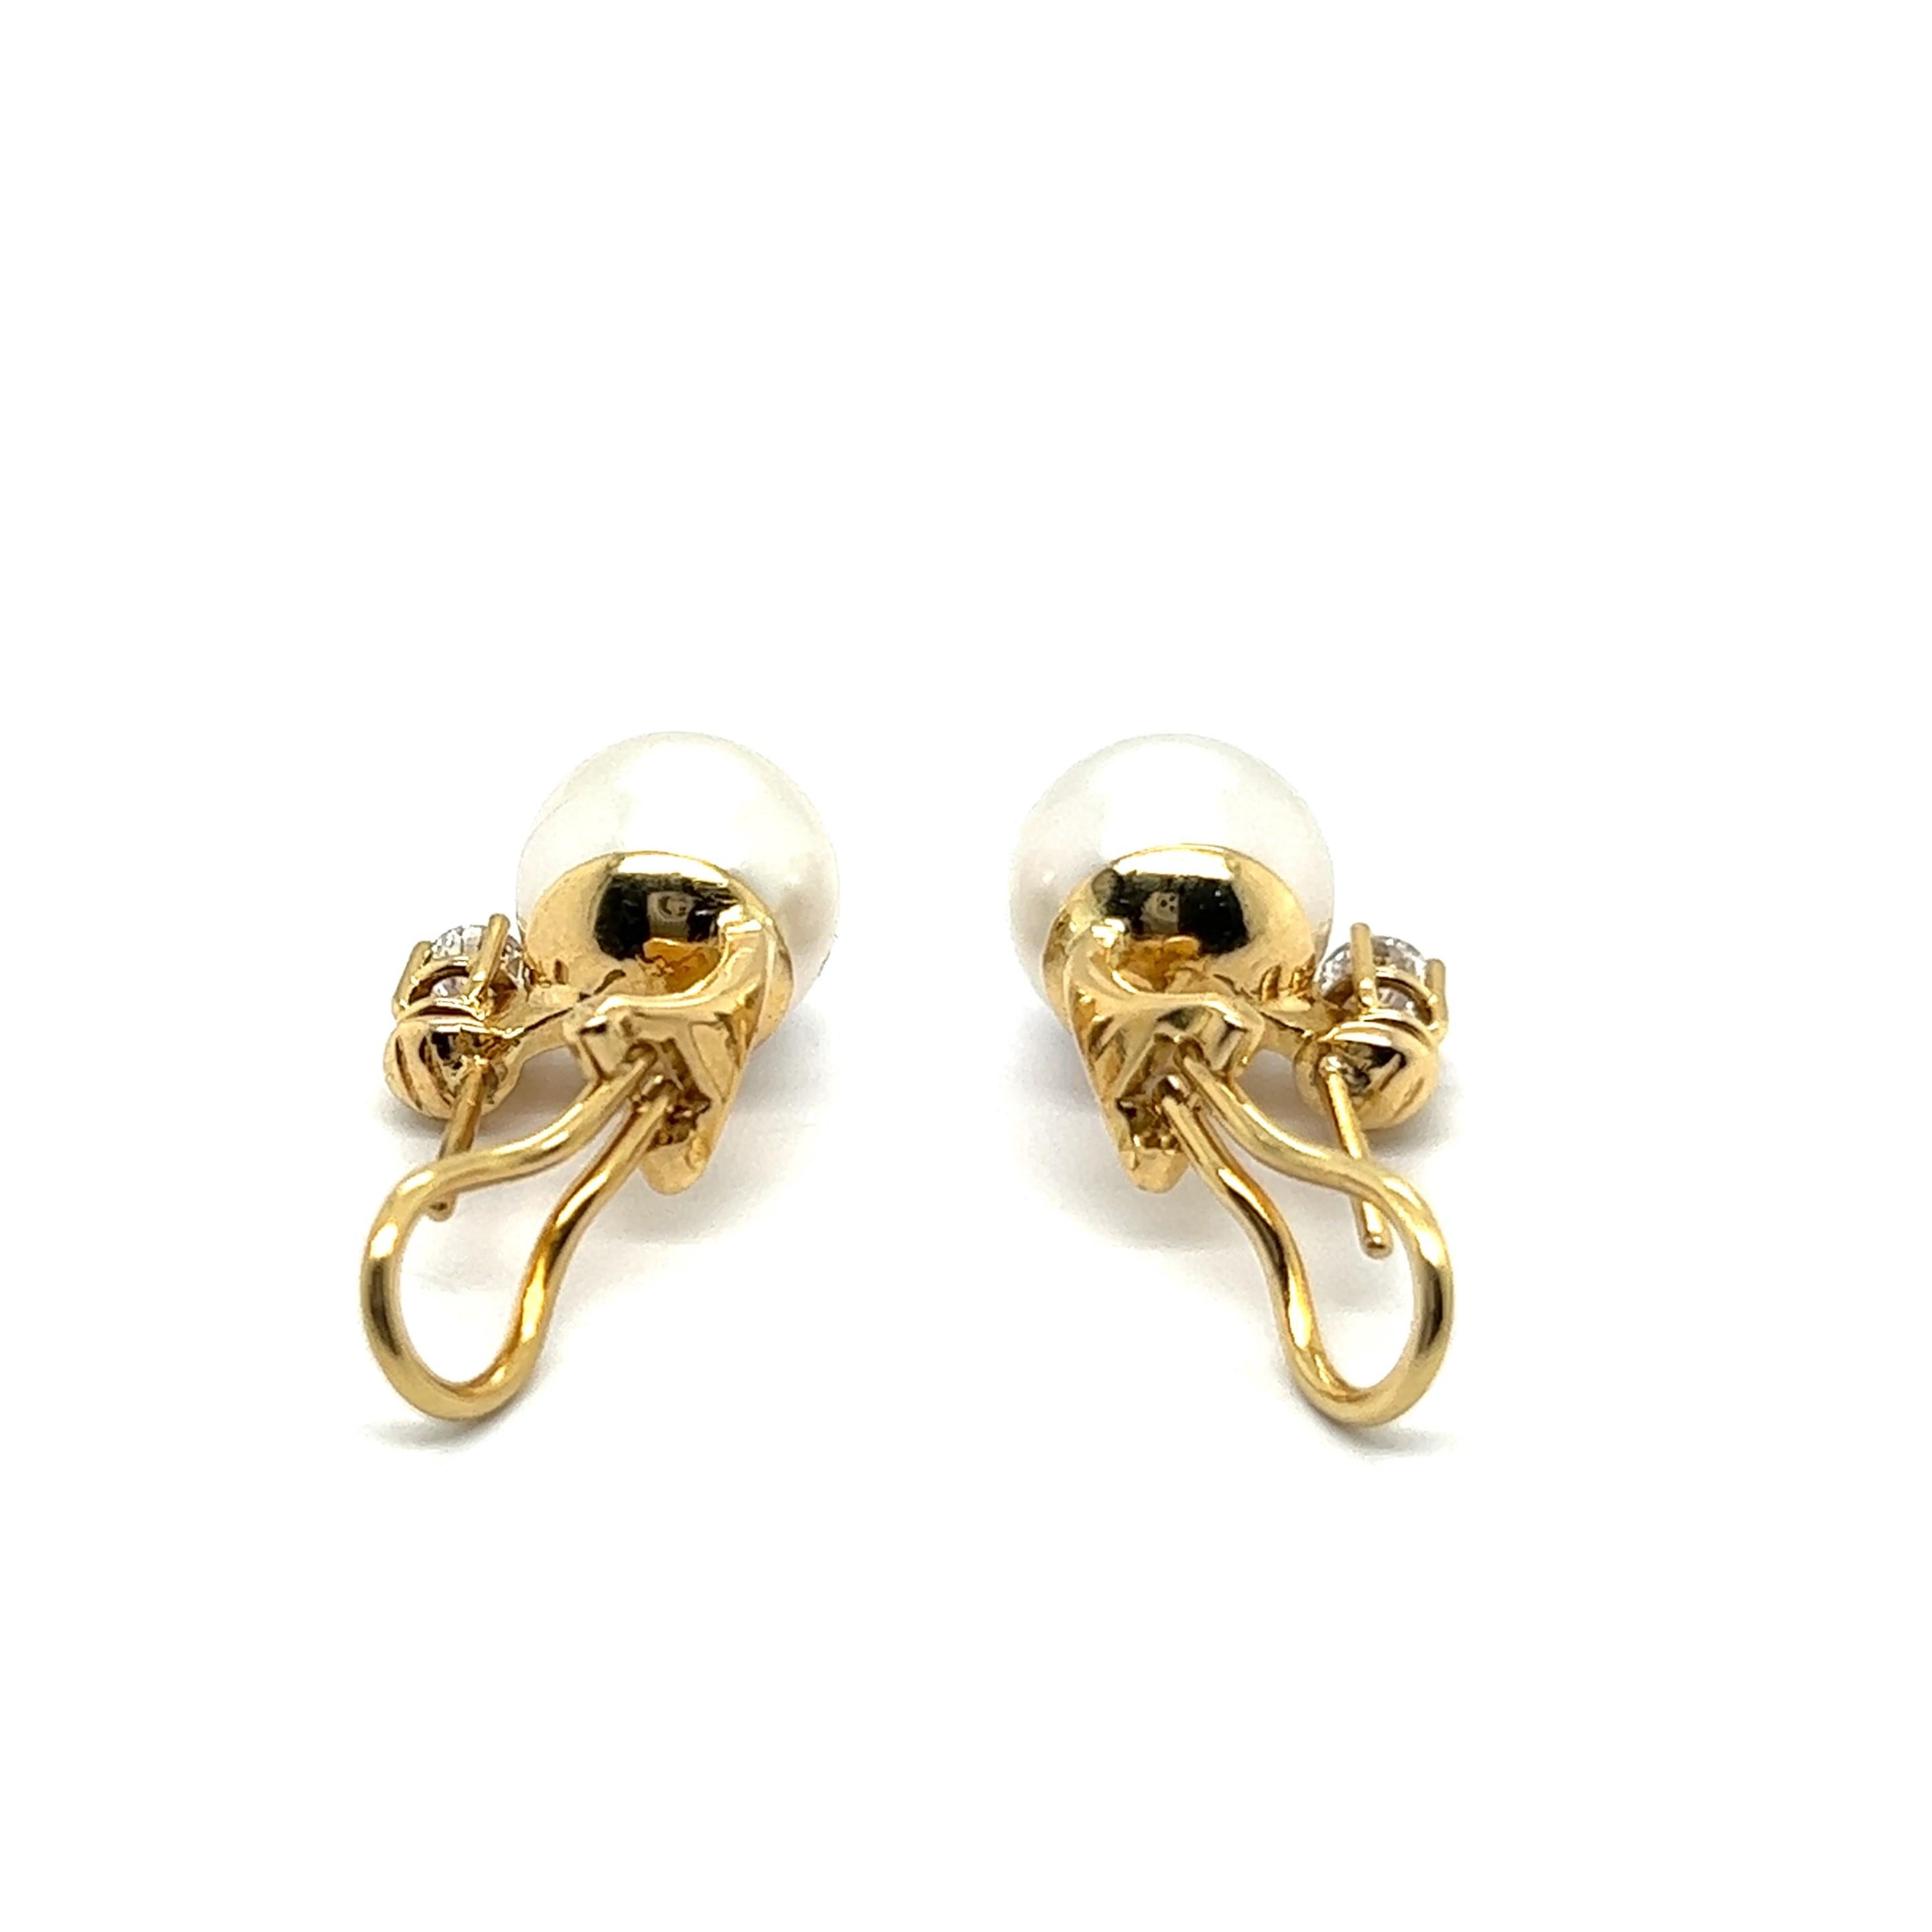 Brilliant Cut Ear clips with South Sea Pearls & Diamonds in 18 Karat Yellow Gold